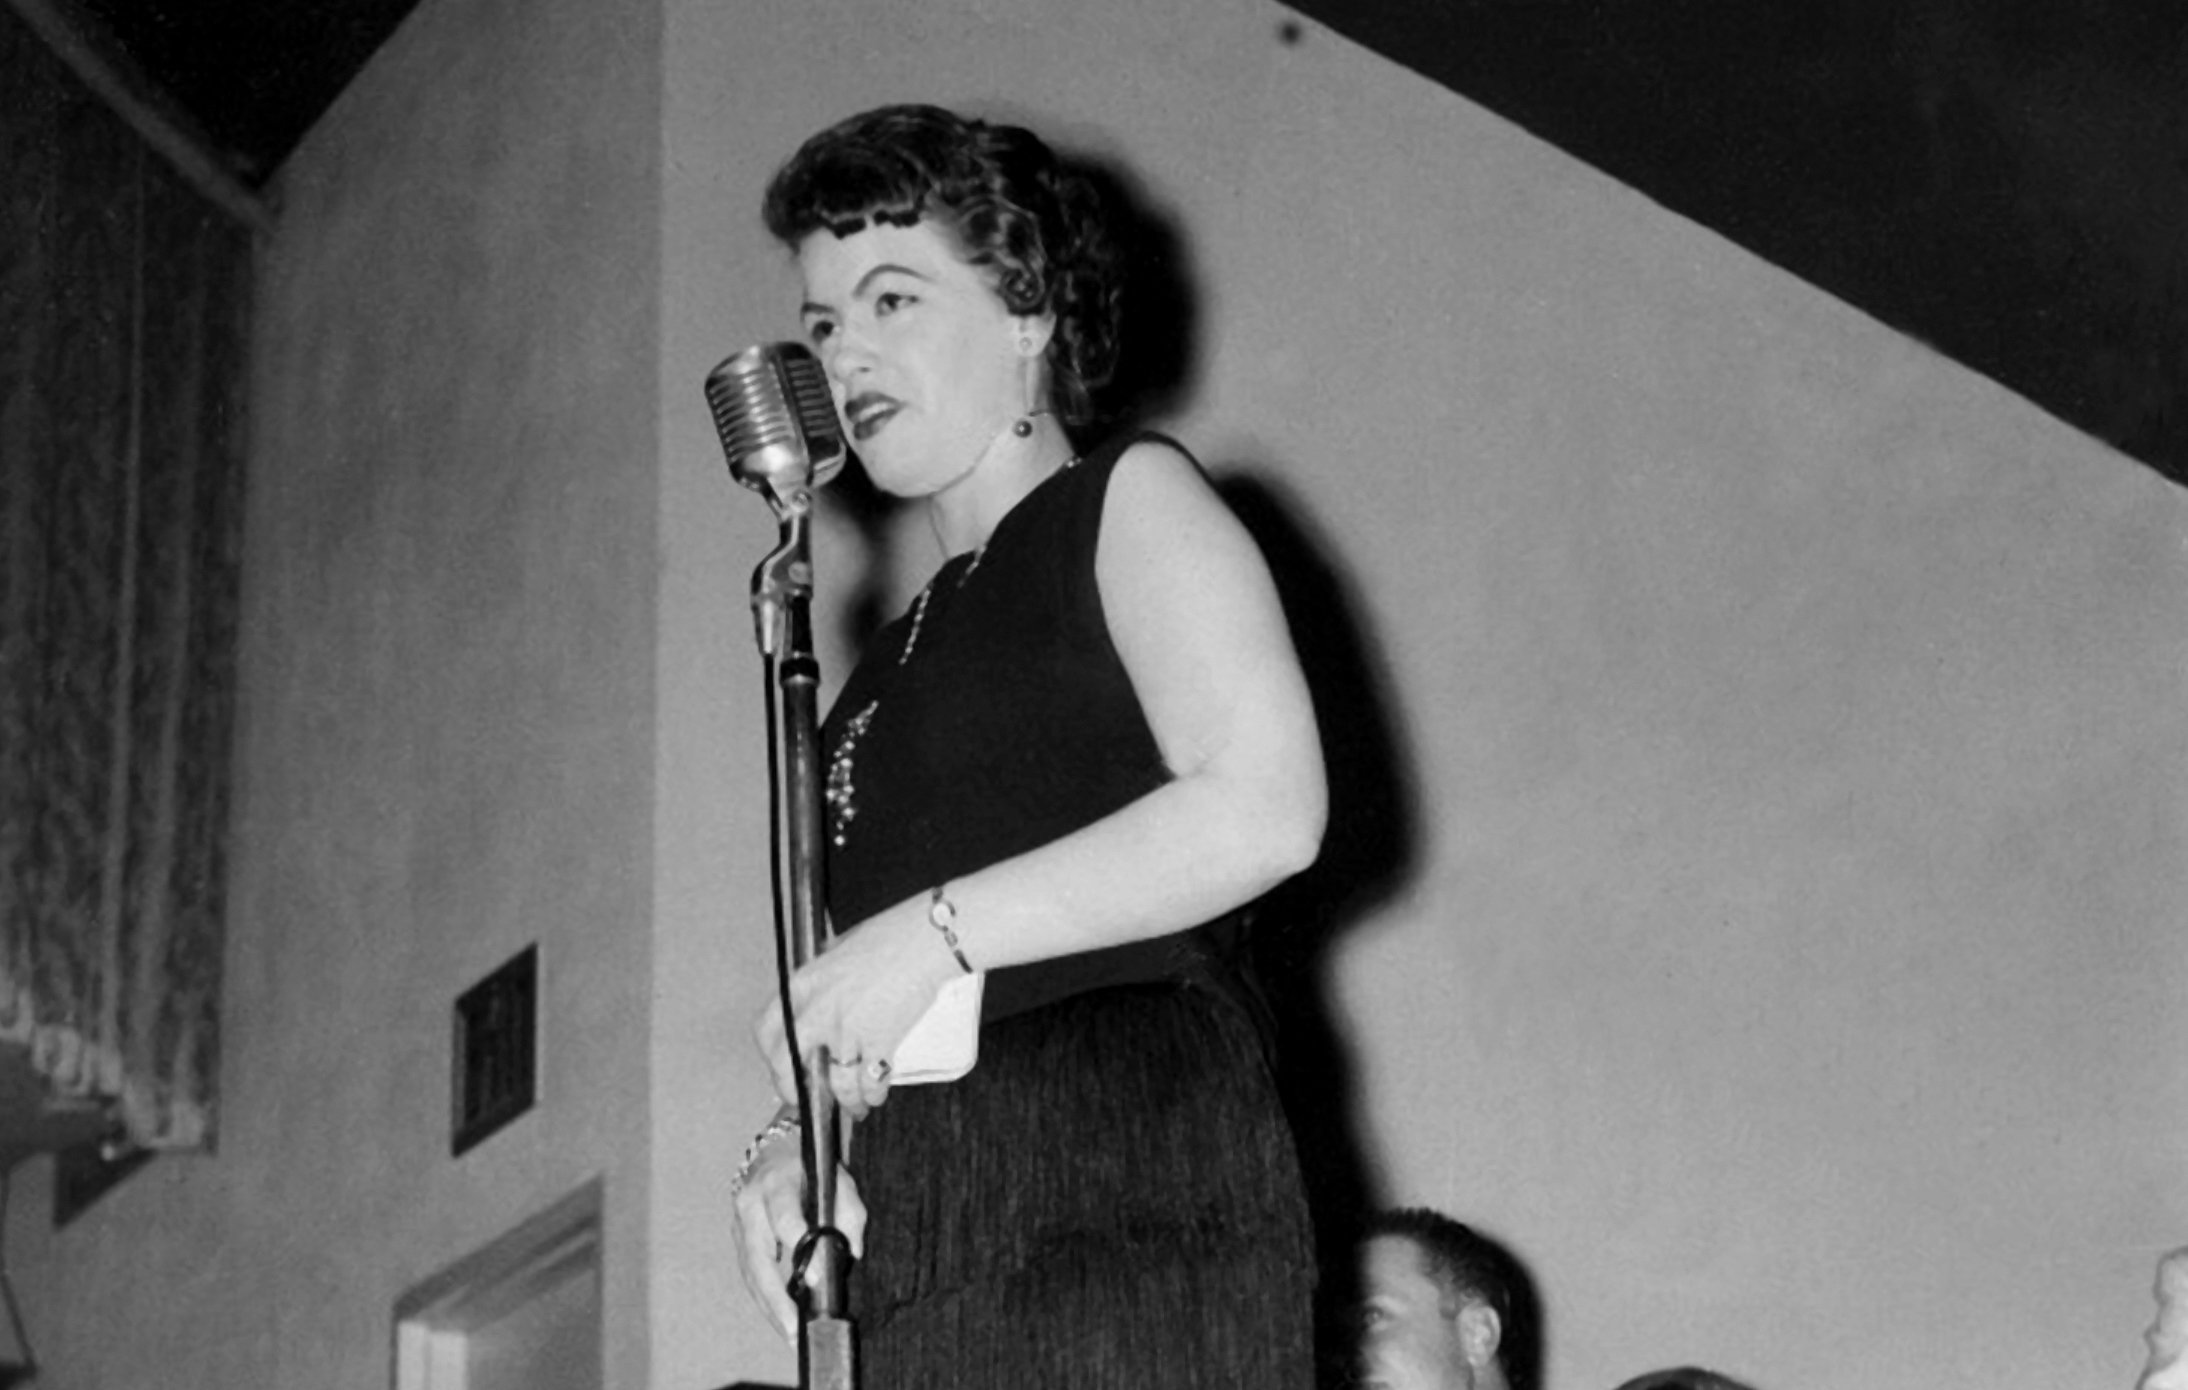 Patsy Cline in a sleeveless dress singing into a microphone c. 1950